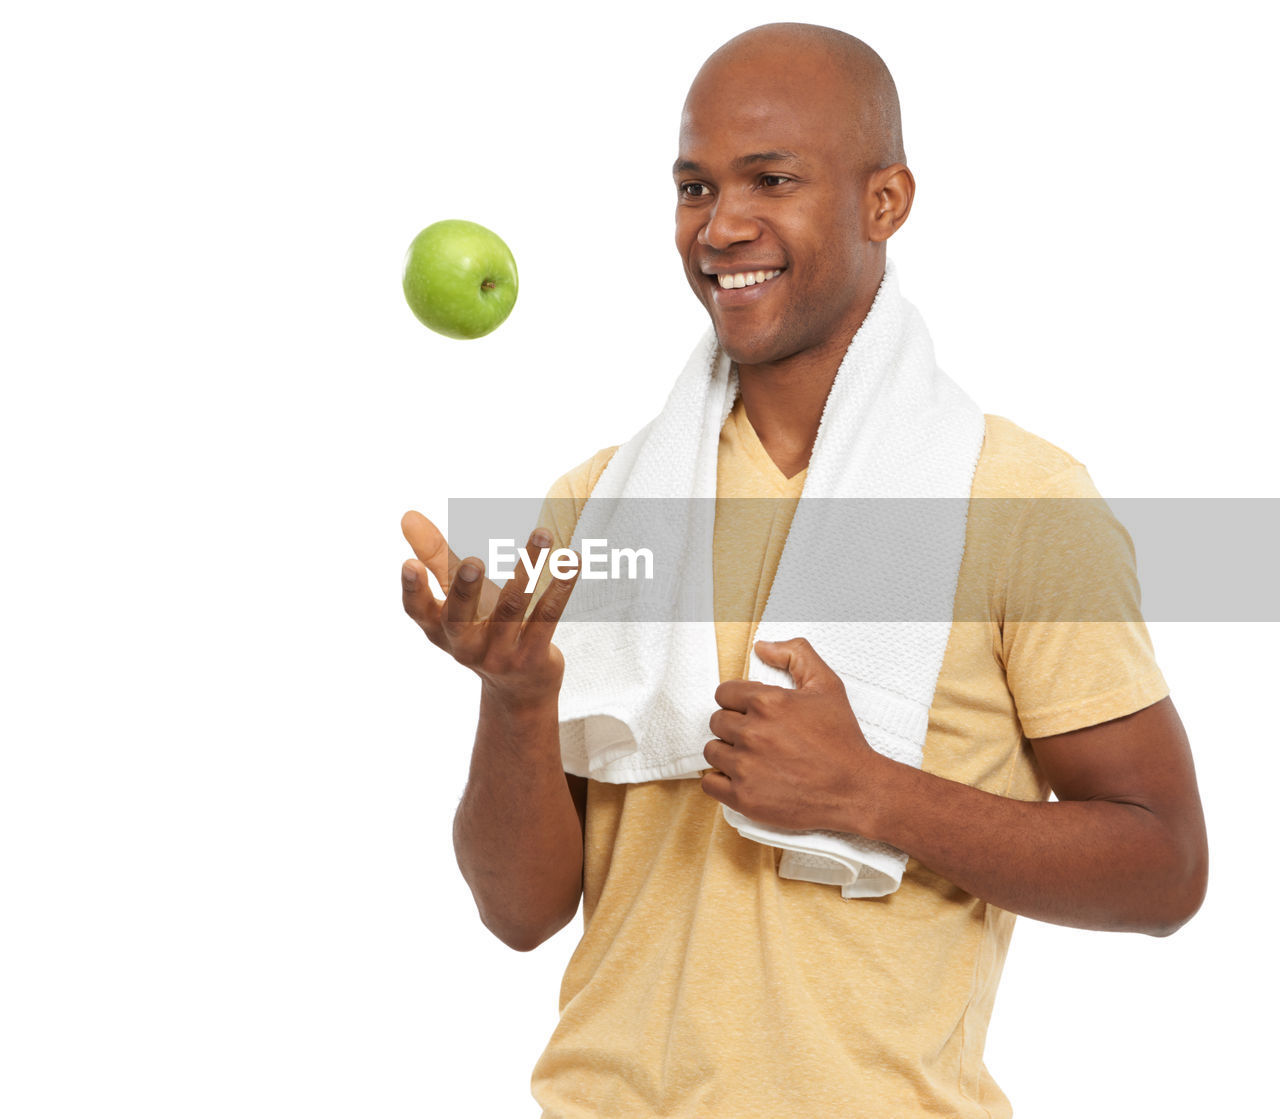 one person, adult, men, smiling, white background, studio shot, cut out, shaved head, finger, sports, happiness, ball, wellbeing, portrait, hand, lifestyles, person, waist up, holding, casual clothing, indoors, arm, healthy eating, standing, young adult, cheerful, clothing, vitality, emotion, copy space, relaxation, looking at camera, smile, teeth, exercising, front view, fruit, tennis